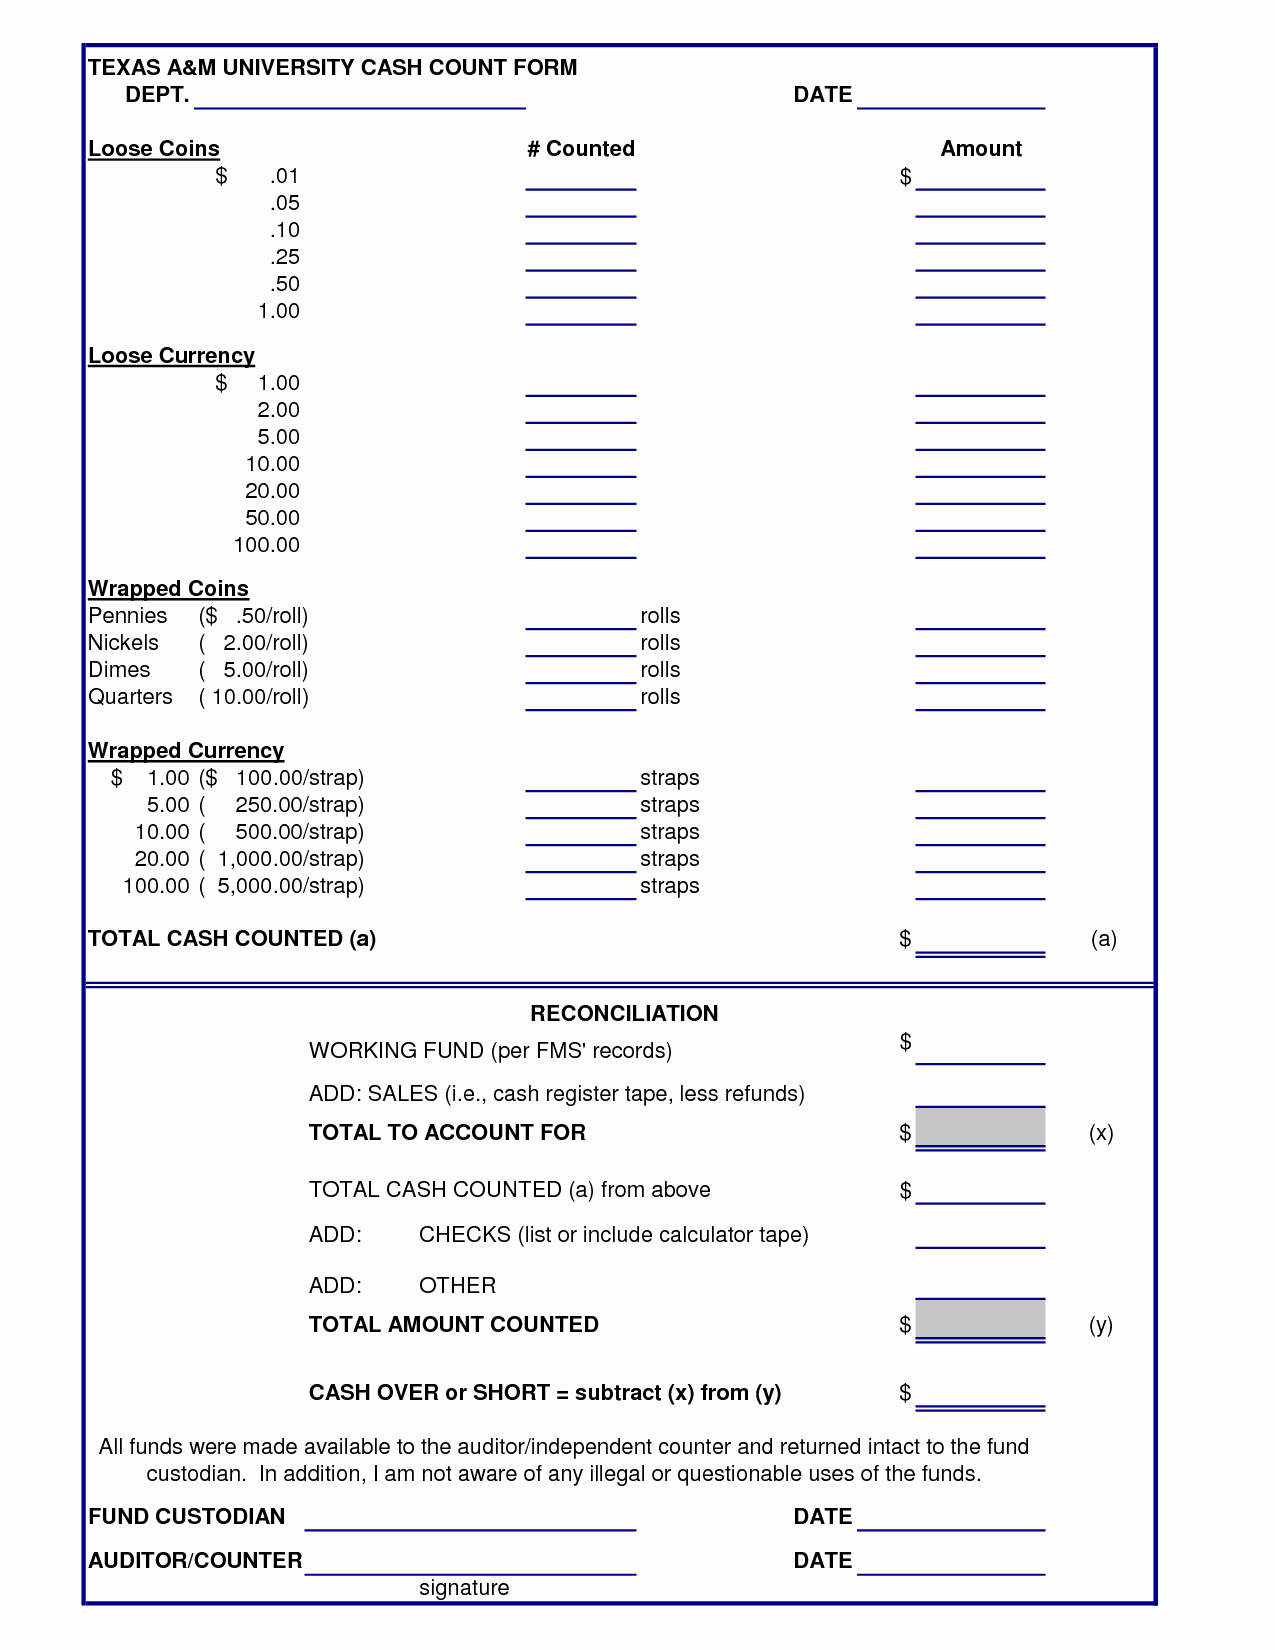 Daily Cash Sheet Template Excel New Cash Drawer Count Sheet Template